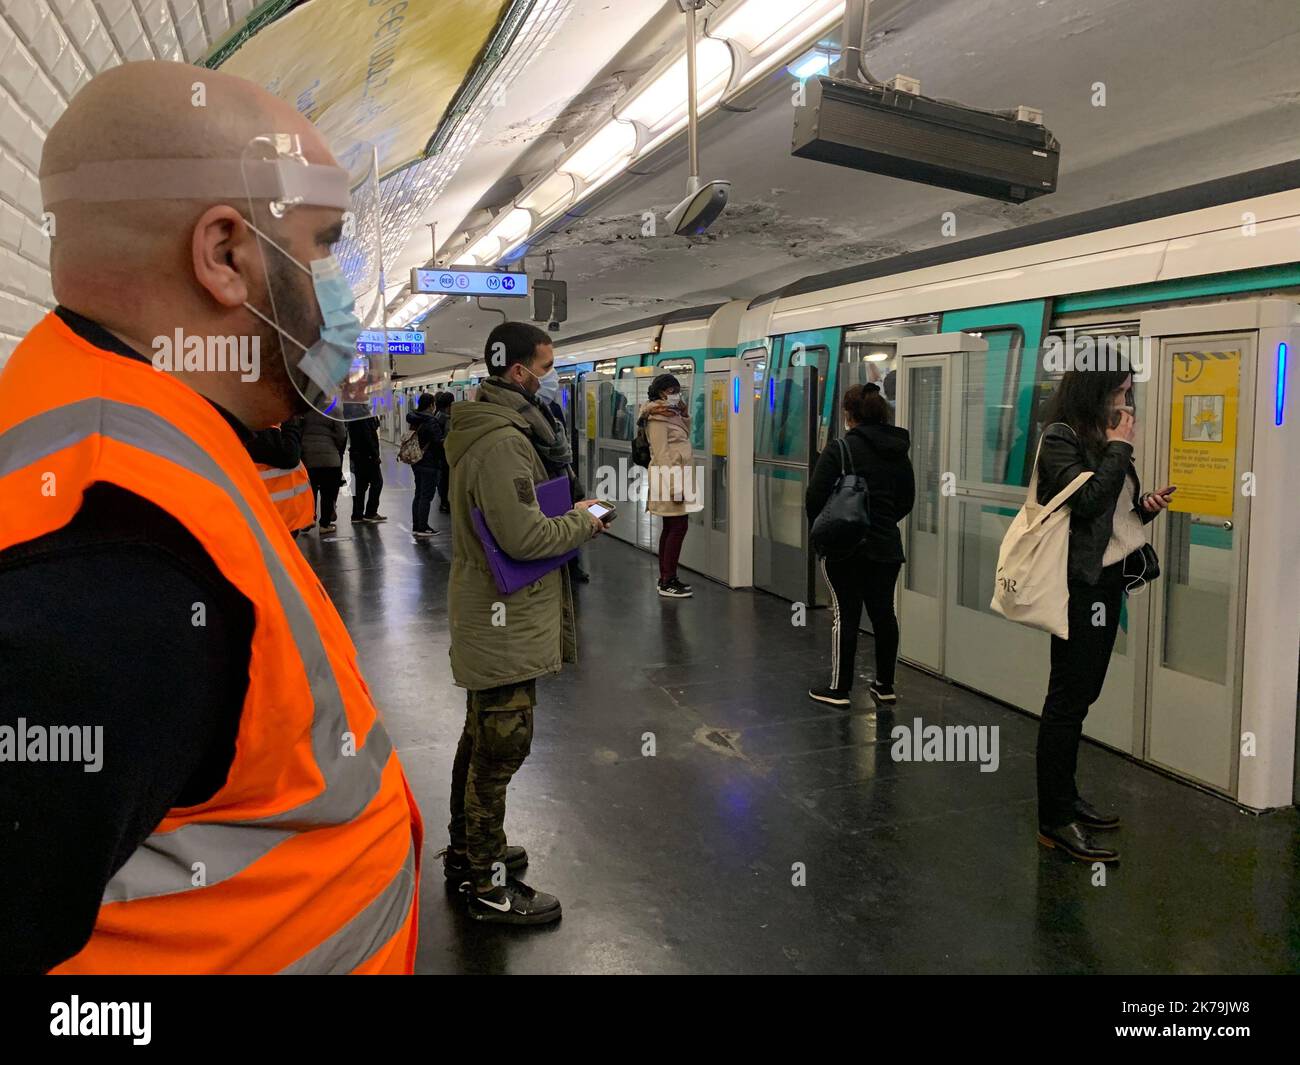 First Day Of Unlockdown In France. line 13 of the metro in Paris Stock Photo